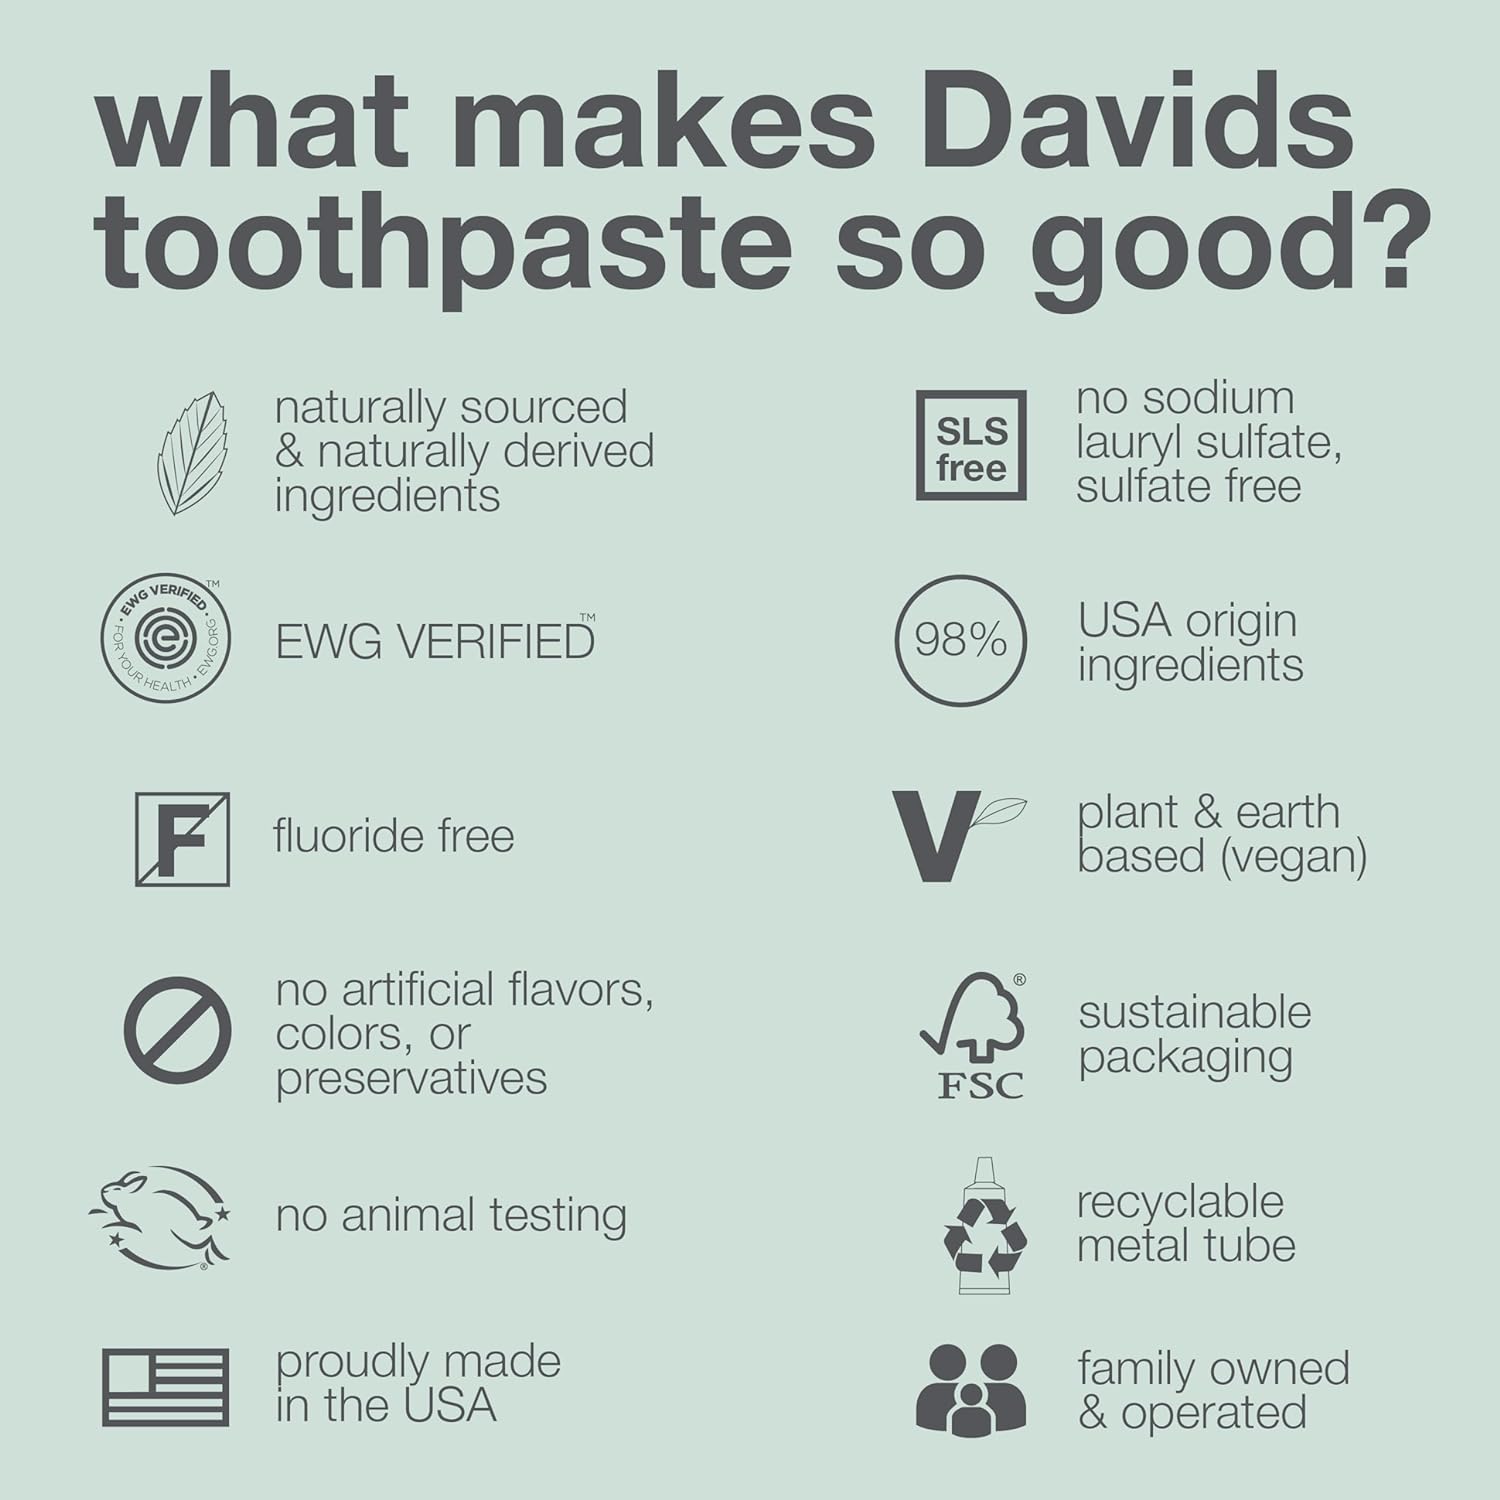 Buy Davids Nano Hydroxyapatite and Antiplaque Strawberry Watermelon Fluoride Free Toothpaste Bundle, SLS Free, Recyclable Metal Tube, Made in USA, 5.25oz on Amazon.com ? FREE SHIPPING on qualified orders